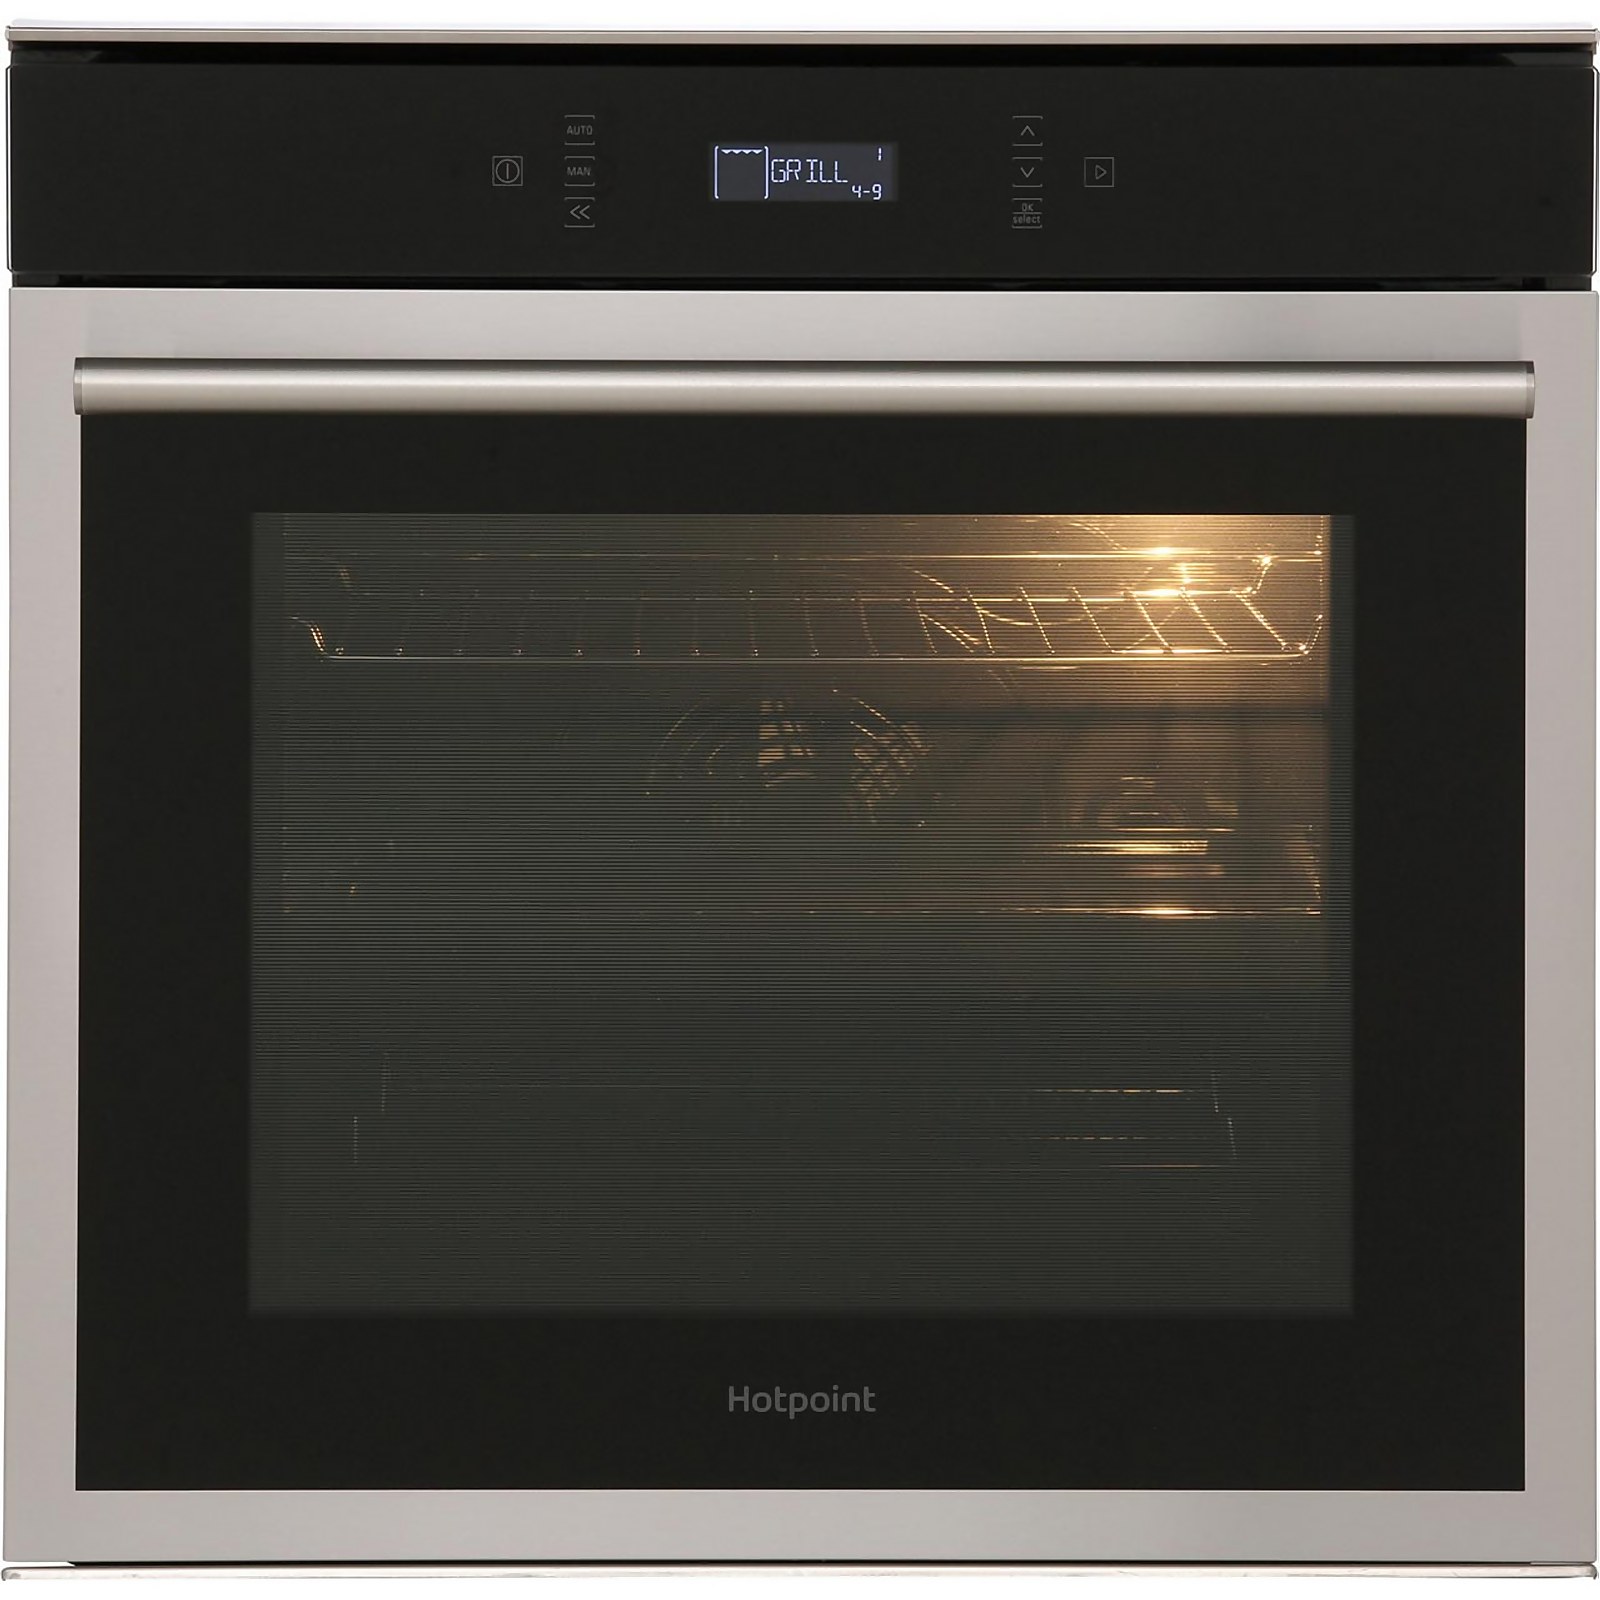 Hotpoint Class 6 SI6874SPIX Built In Electric Single Oven - Stainless Steel